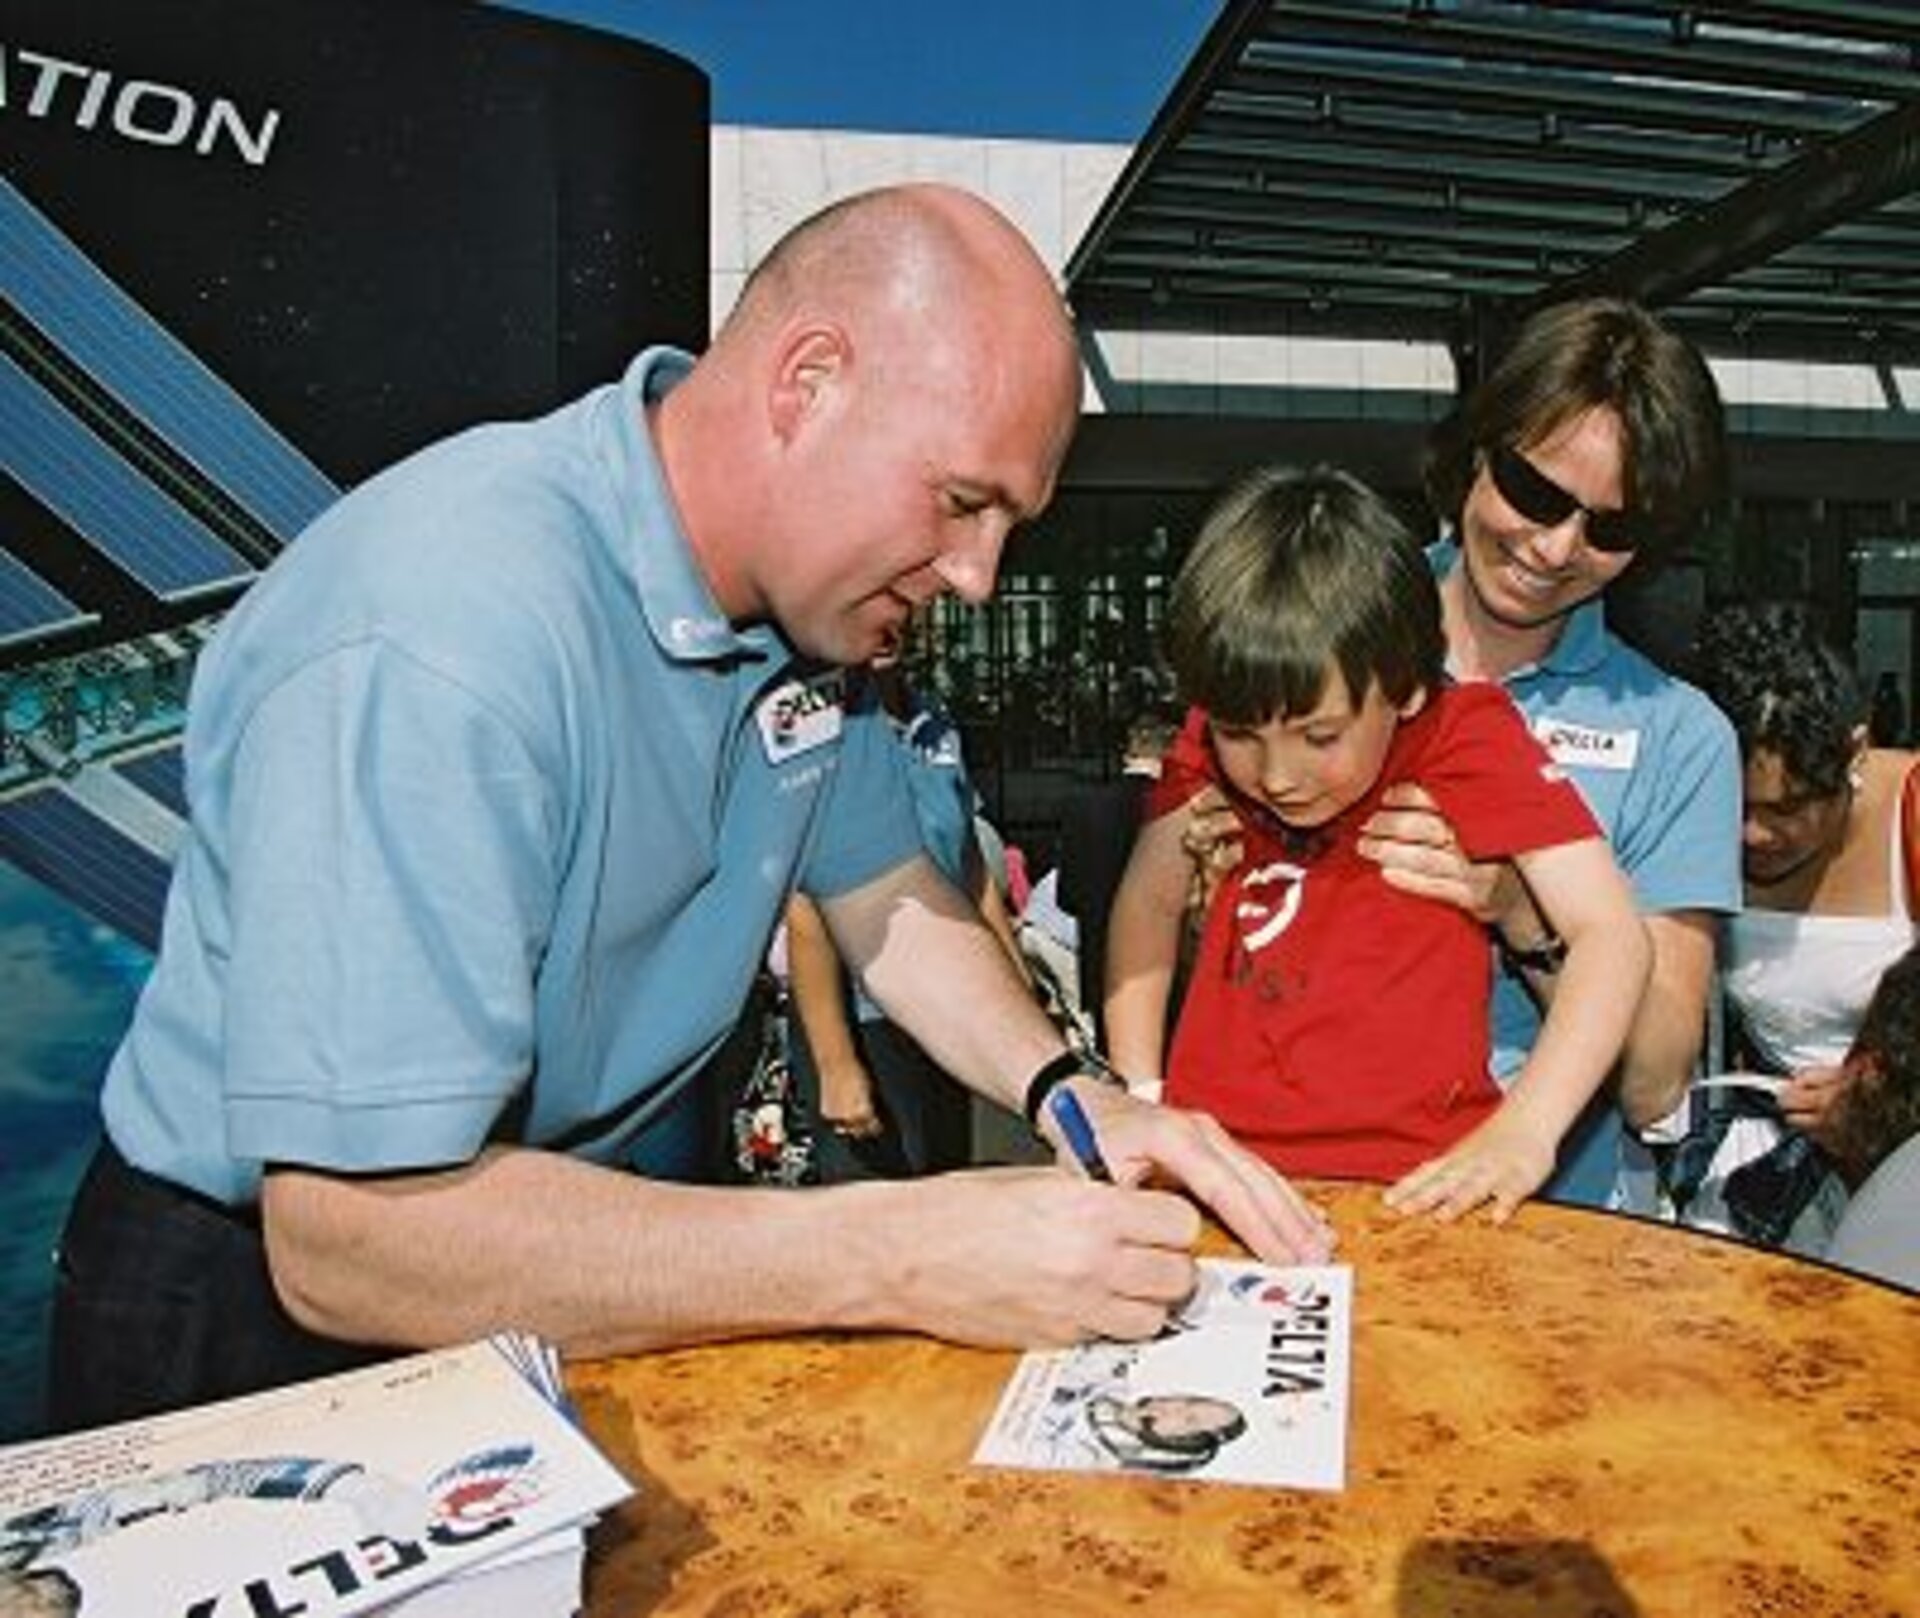 André Kuipers hands out autographs to young space fans